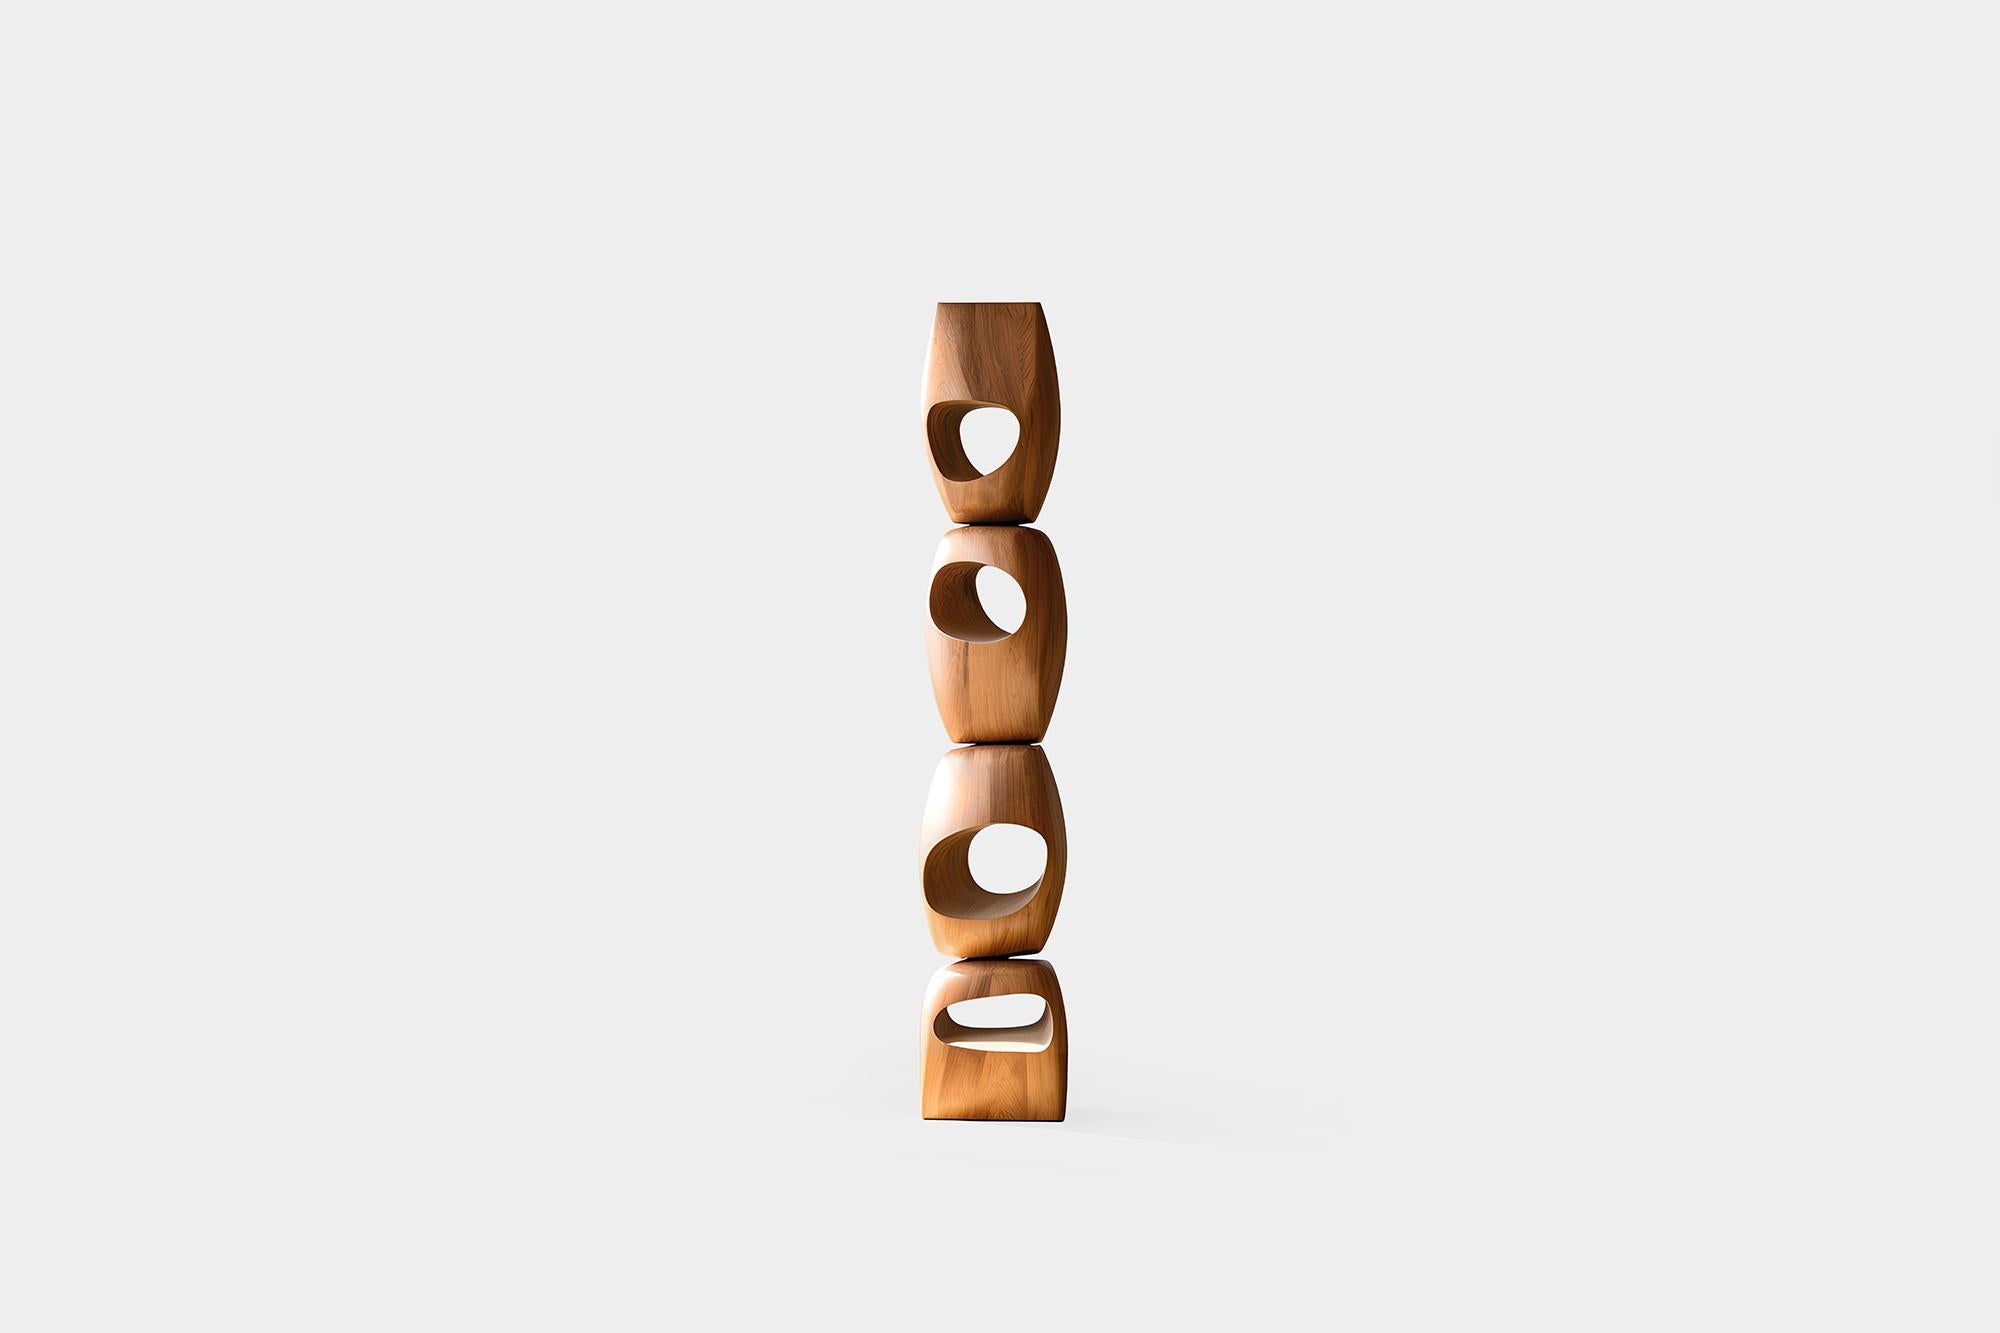 Hand-Crafted Still Stand No56: Abstract Wooden Grace by NONO, Modern Escalona Sculpture For Sale